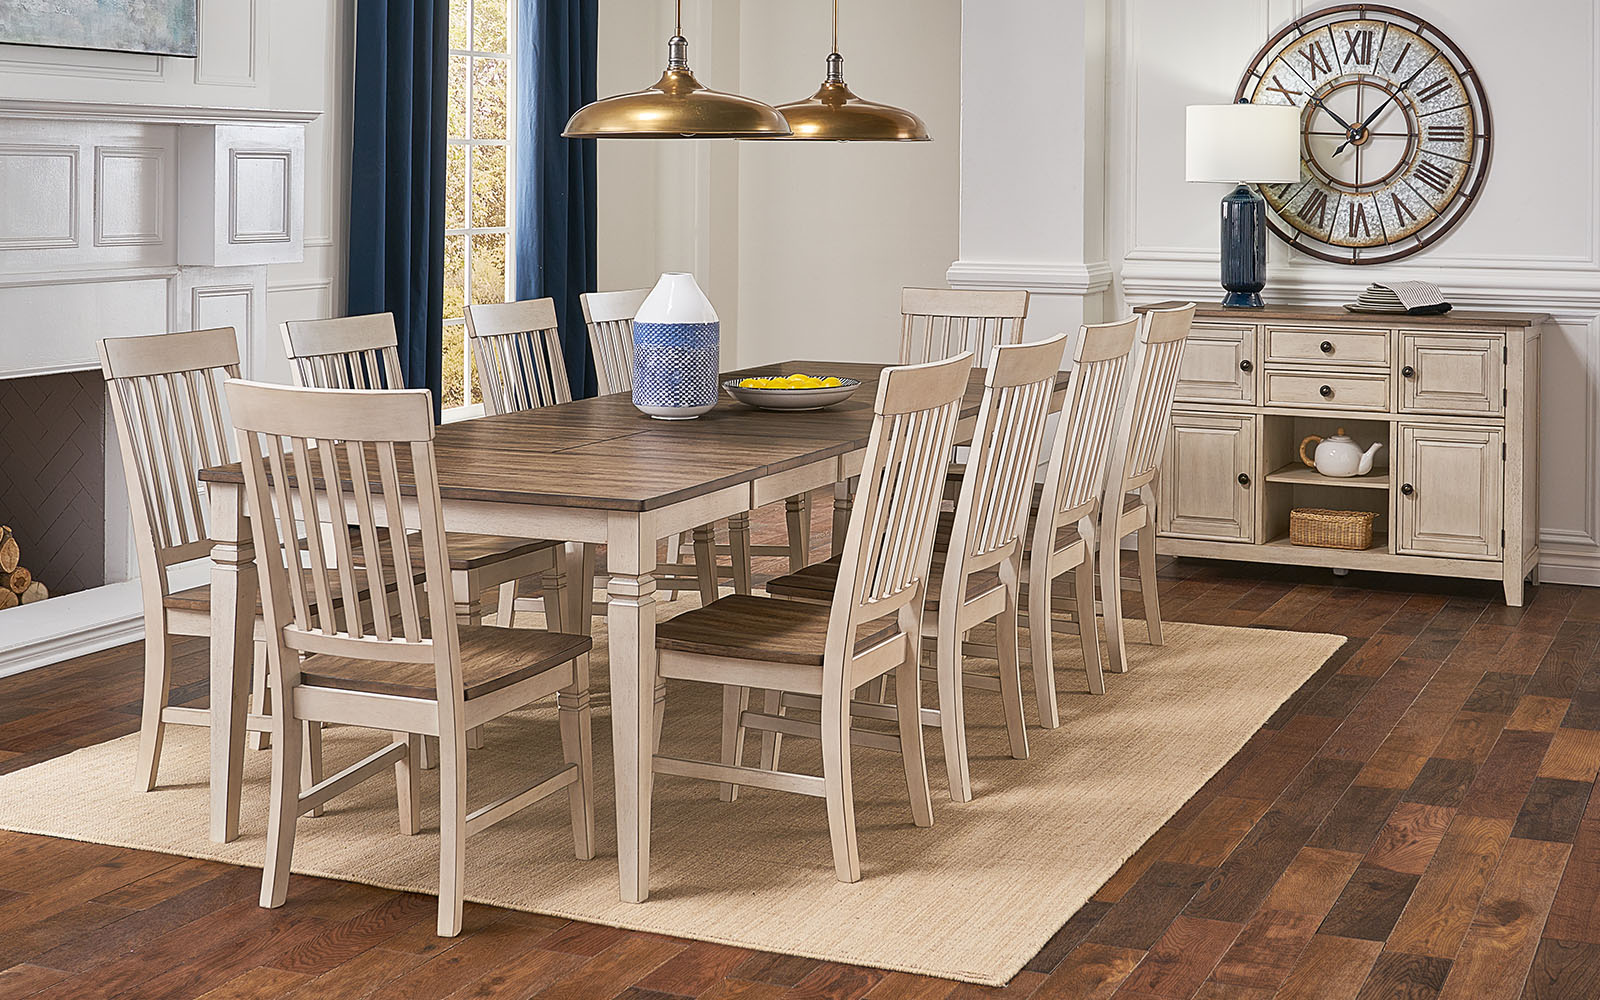 Guide to Dining Table Designs